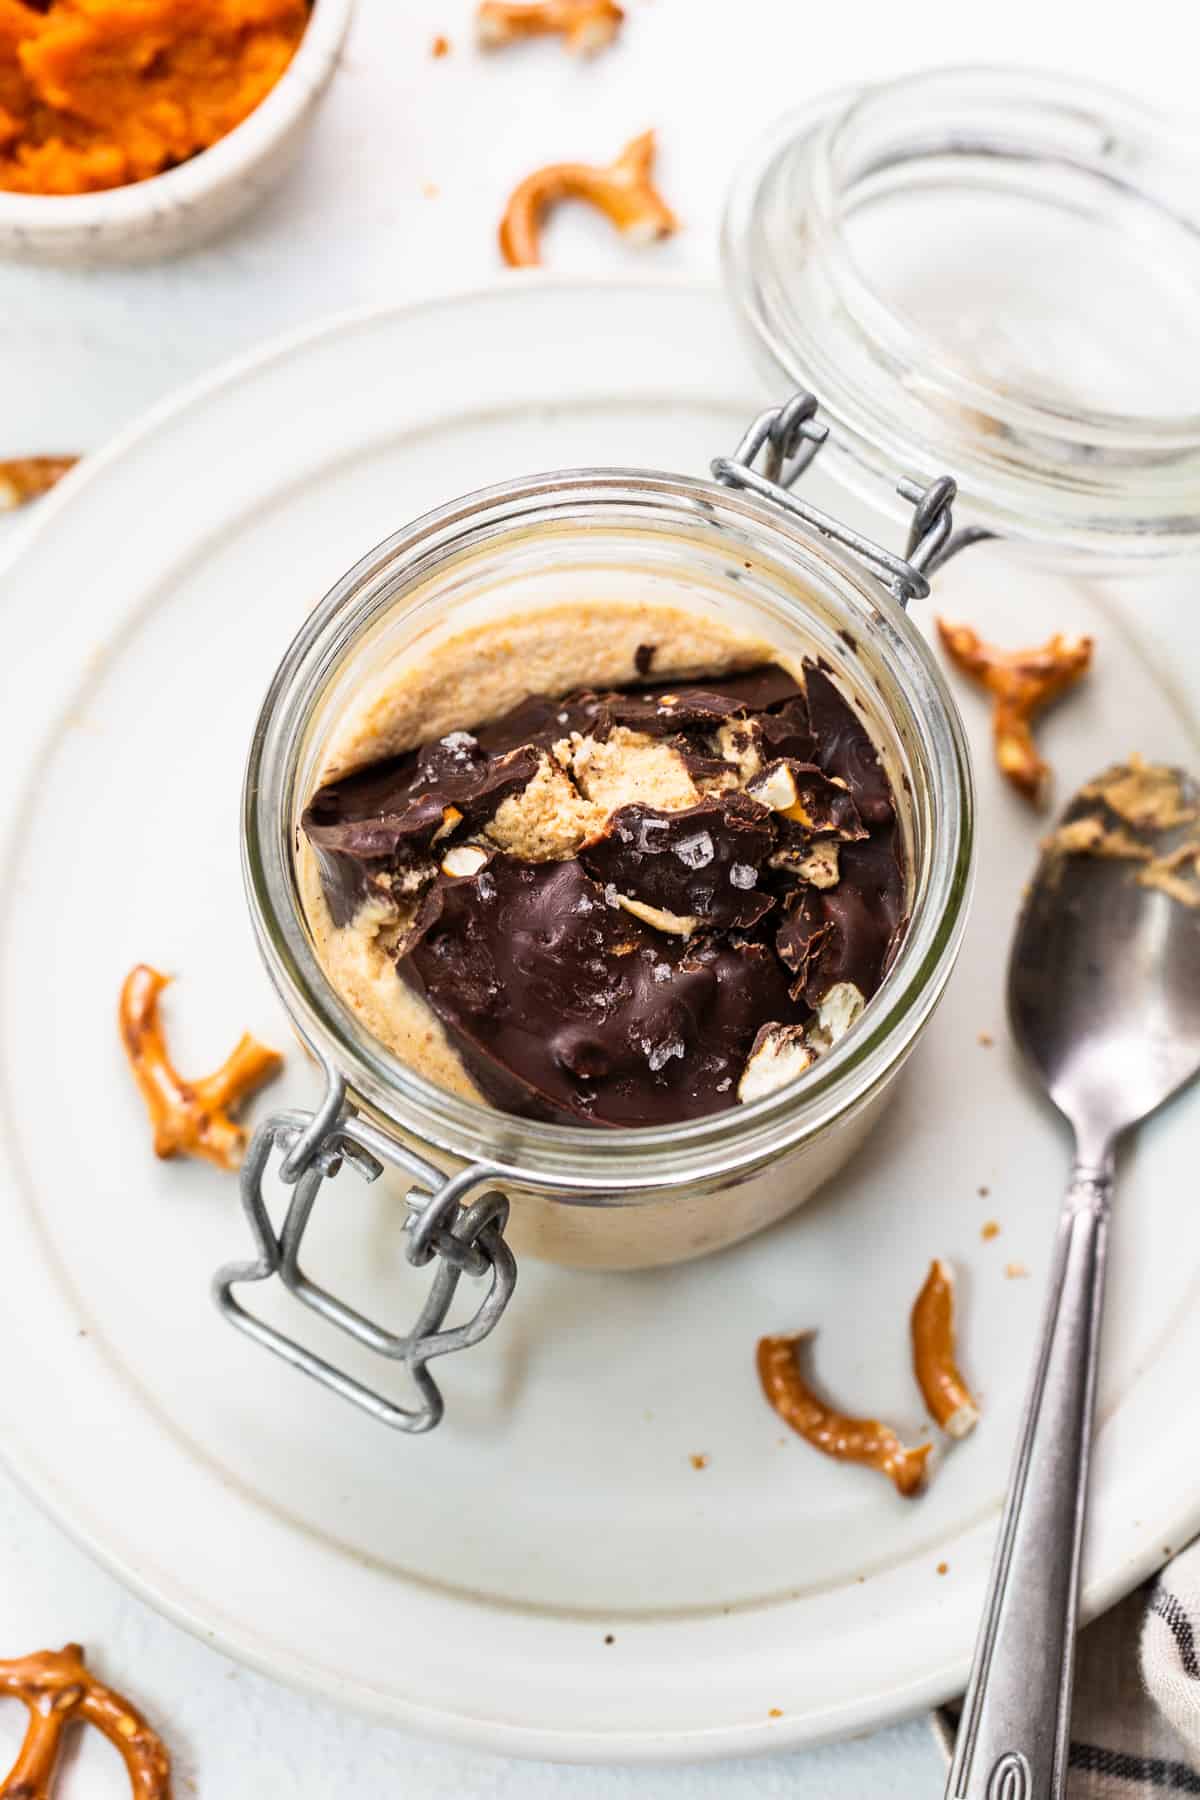 Pumpkin mousse in a jar with chocolate topping.